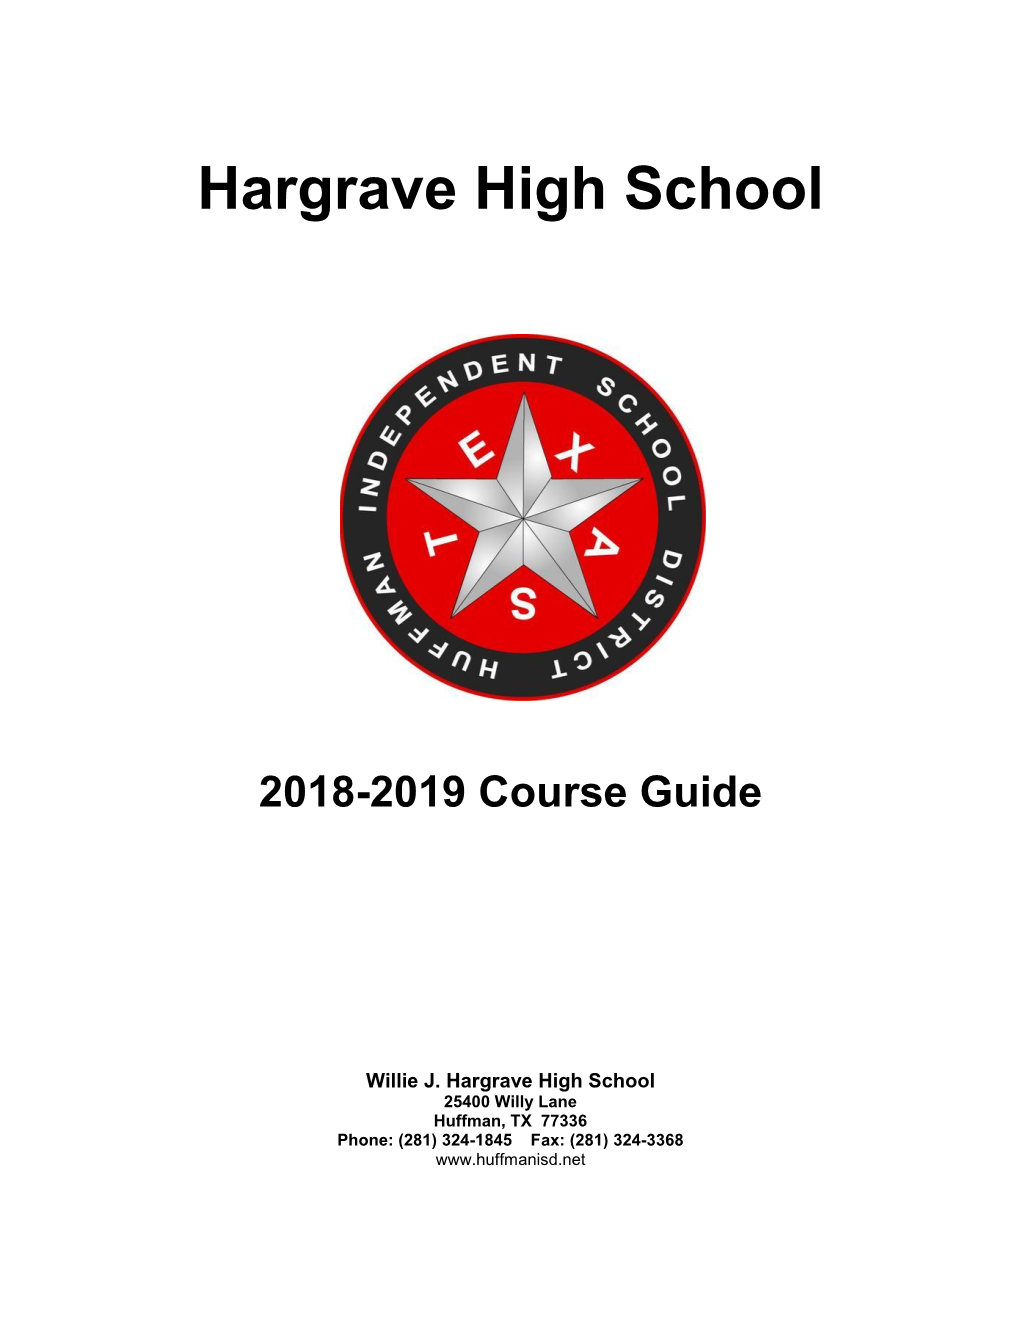 Hargrave High School 2018-2019 Course Guide